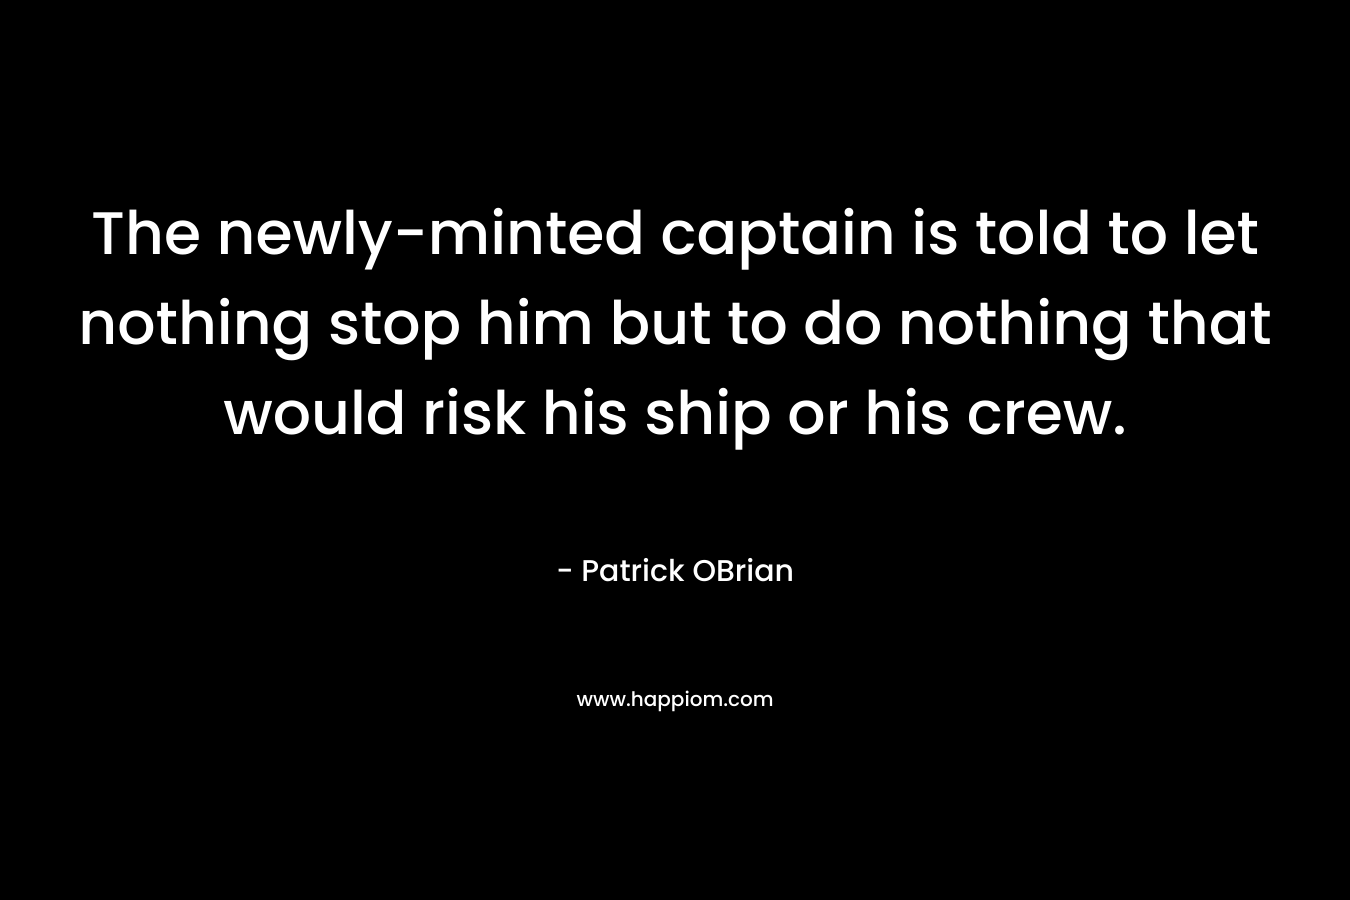 The newly-minted captain is told to let nothing stop him but to do nothing that would risk his ship or his crew.